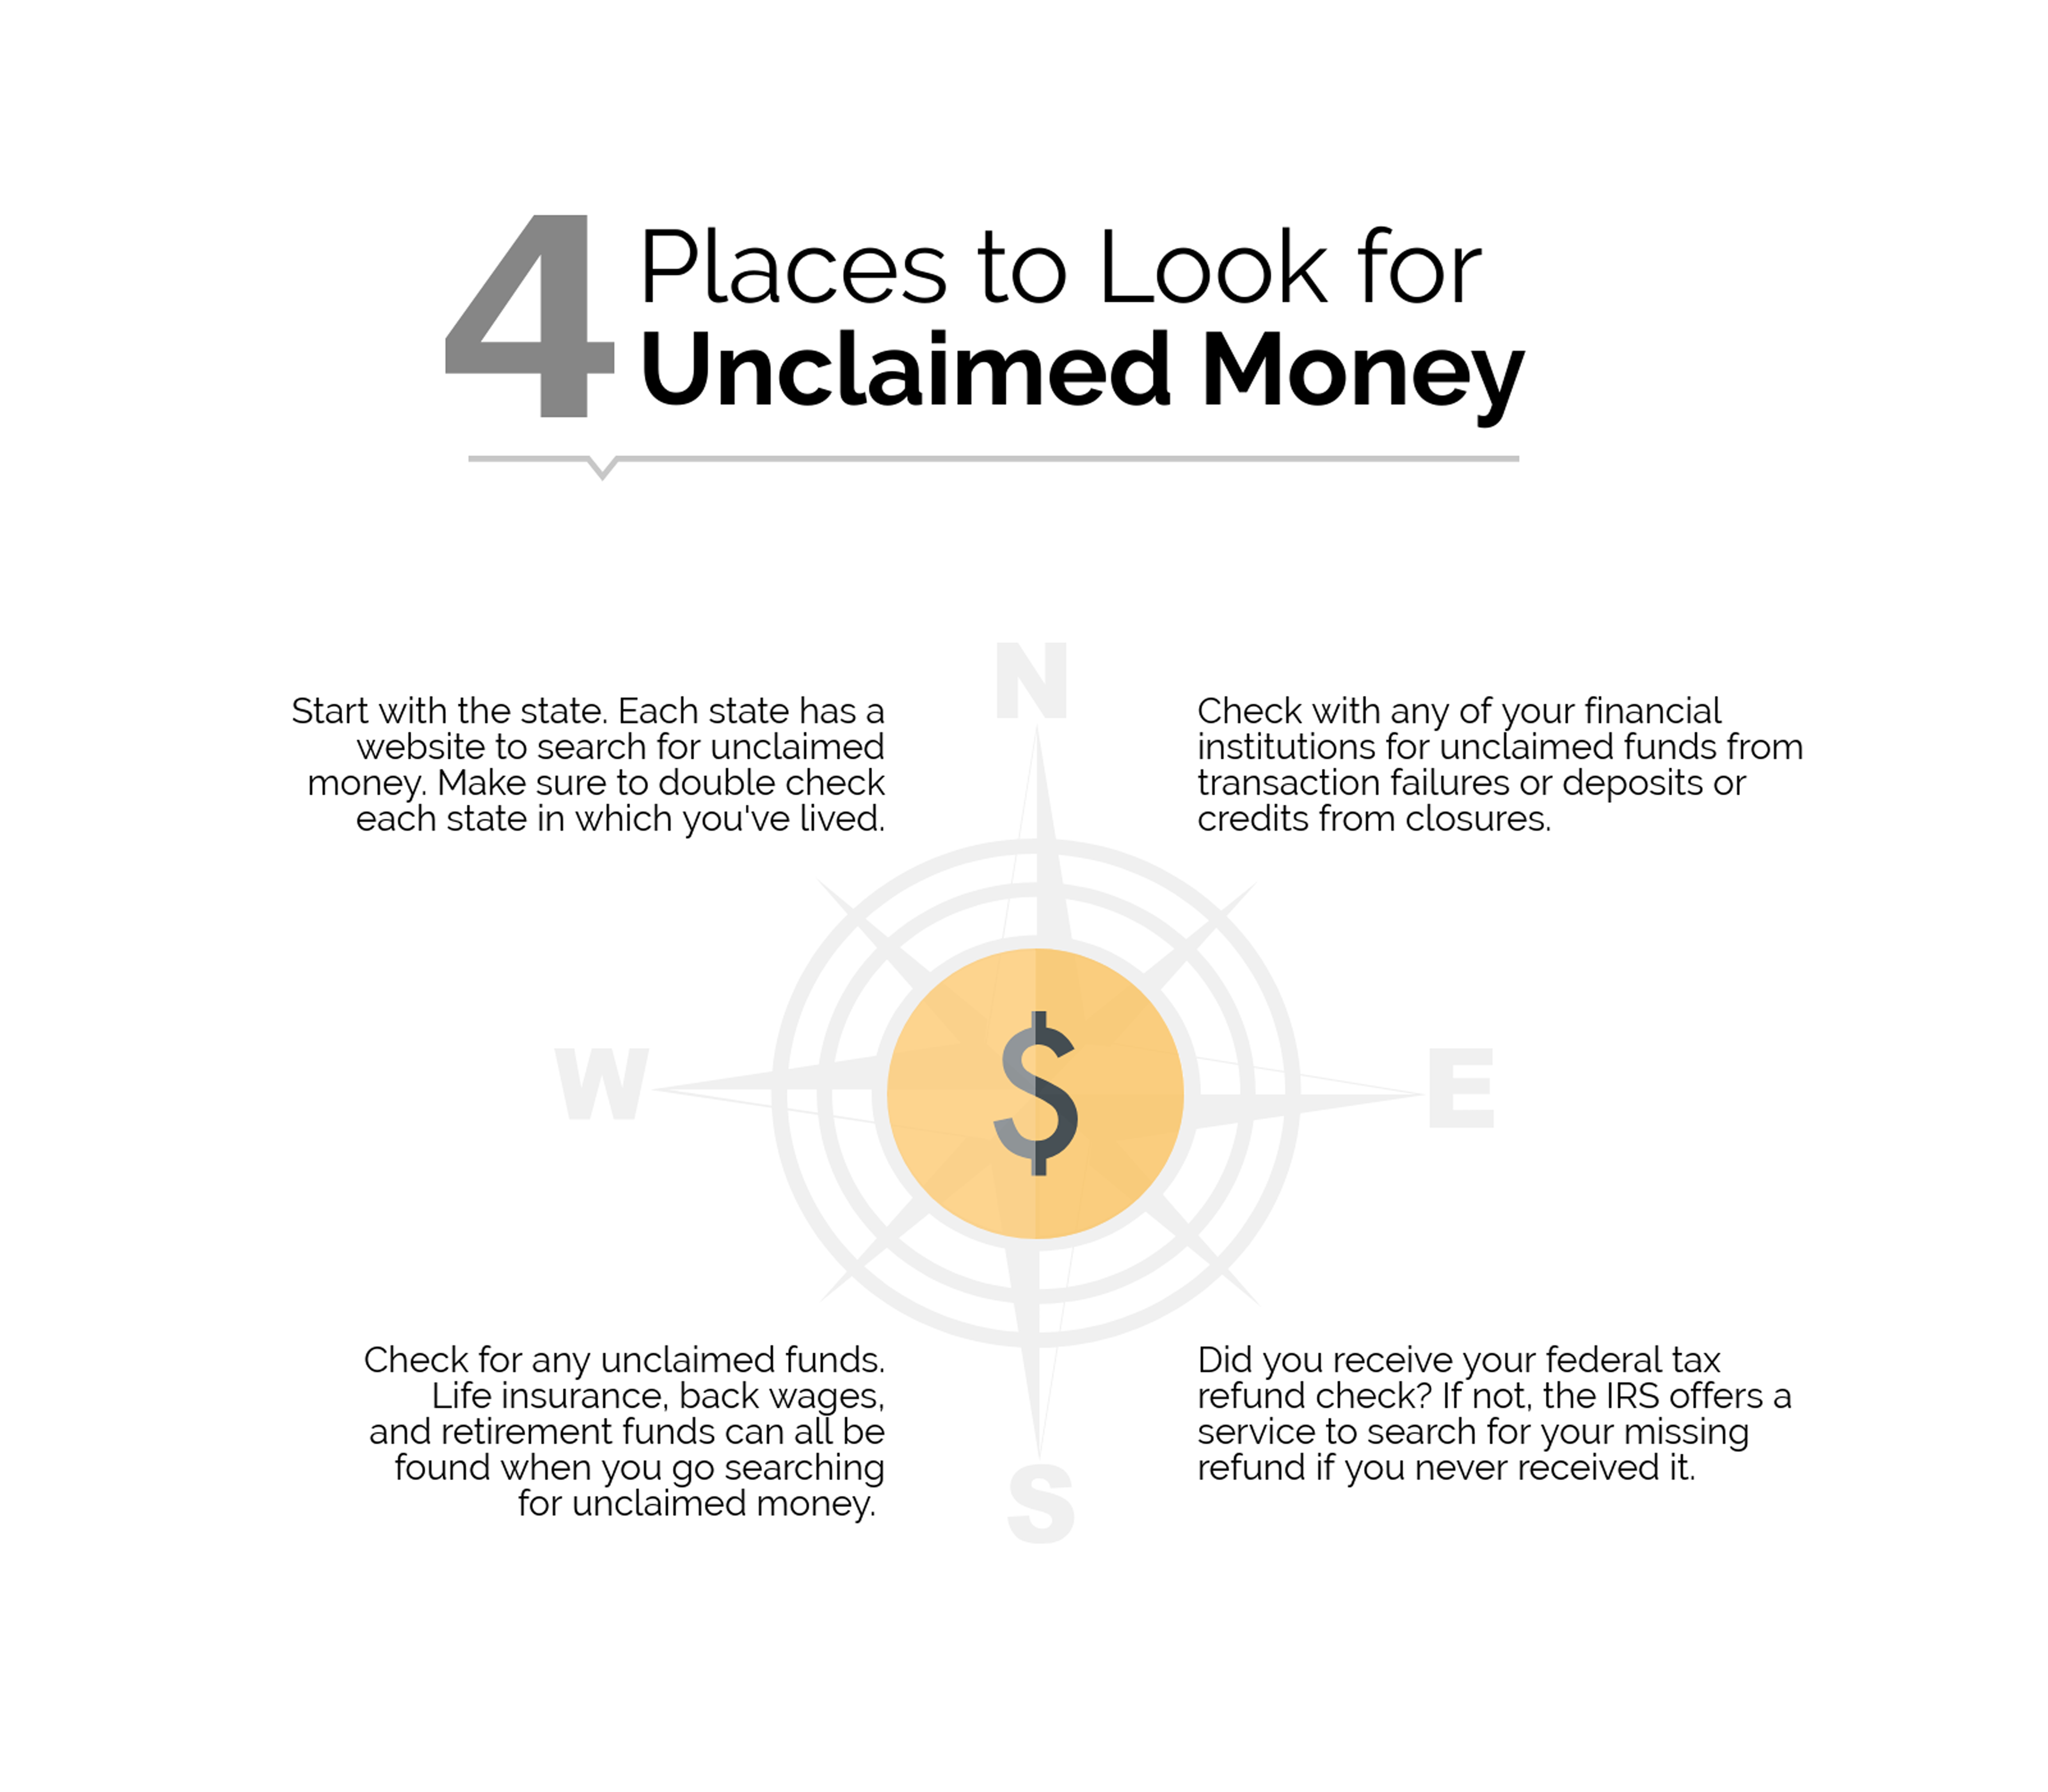 Unclaimed money